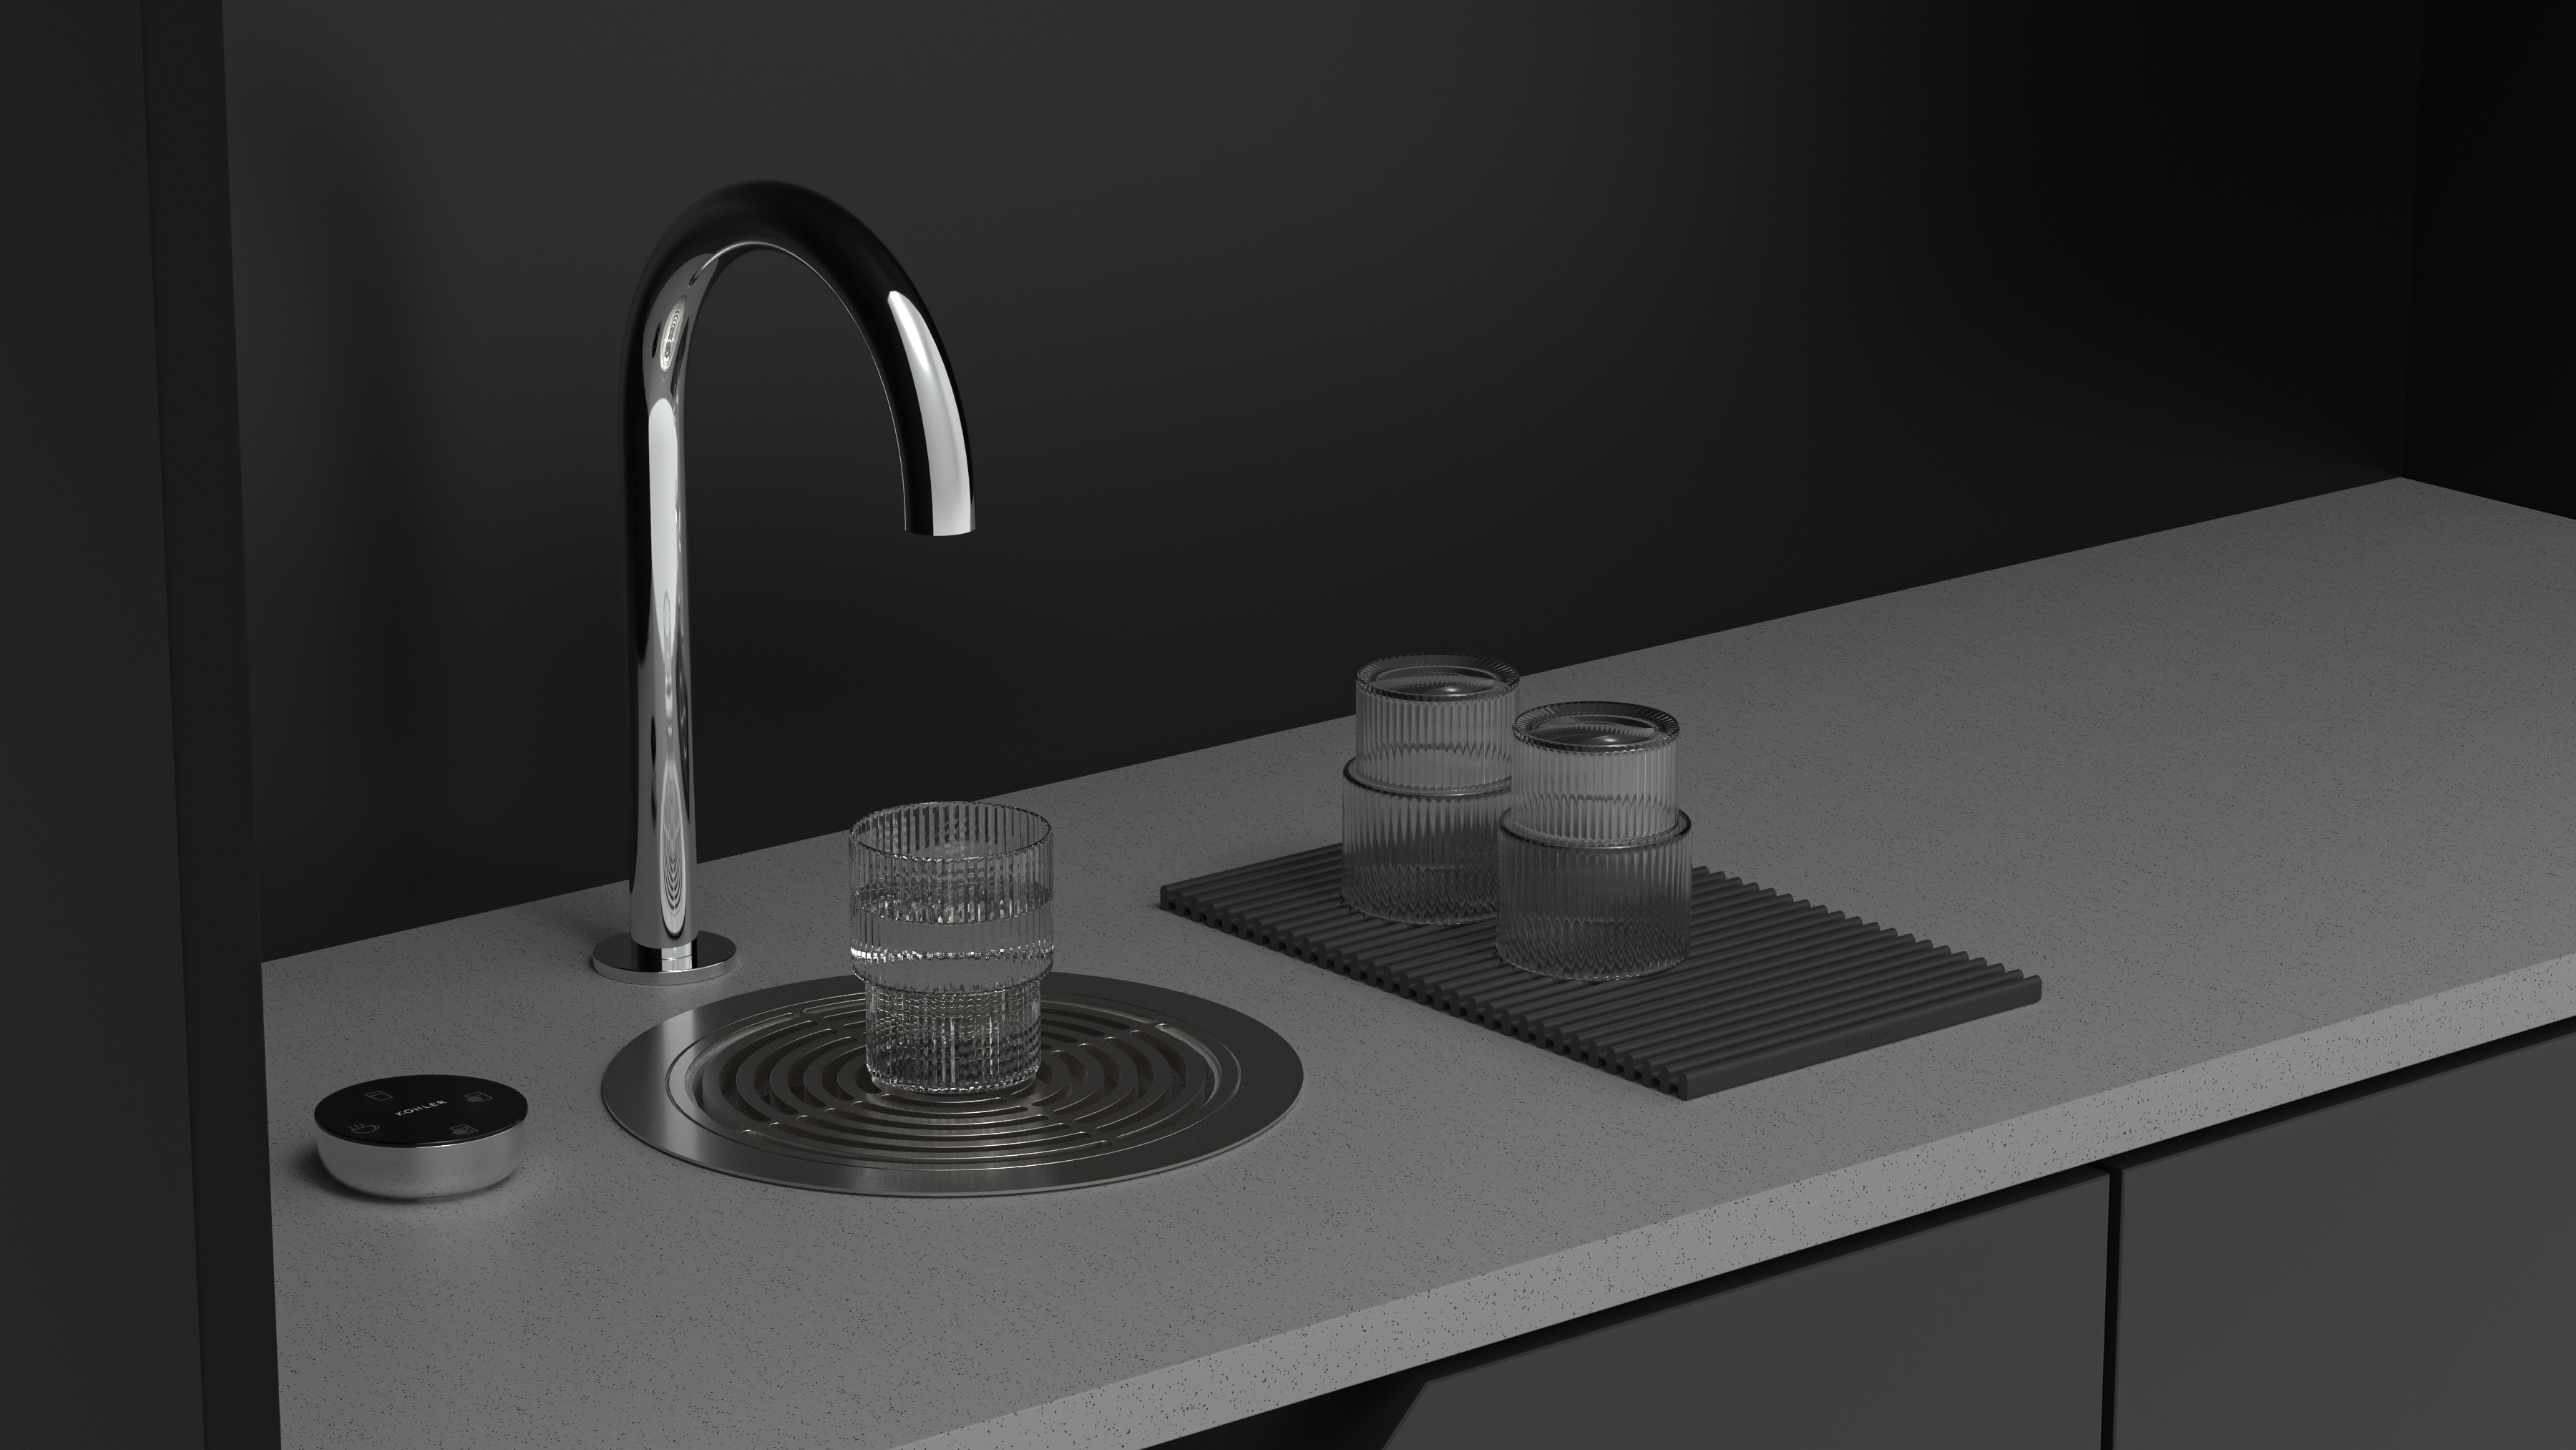 All-in-one Beverage Faucet